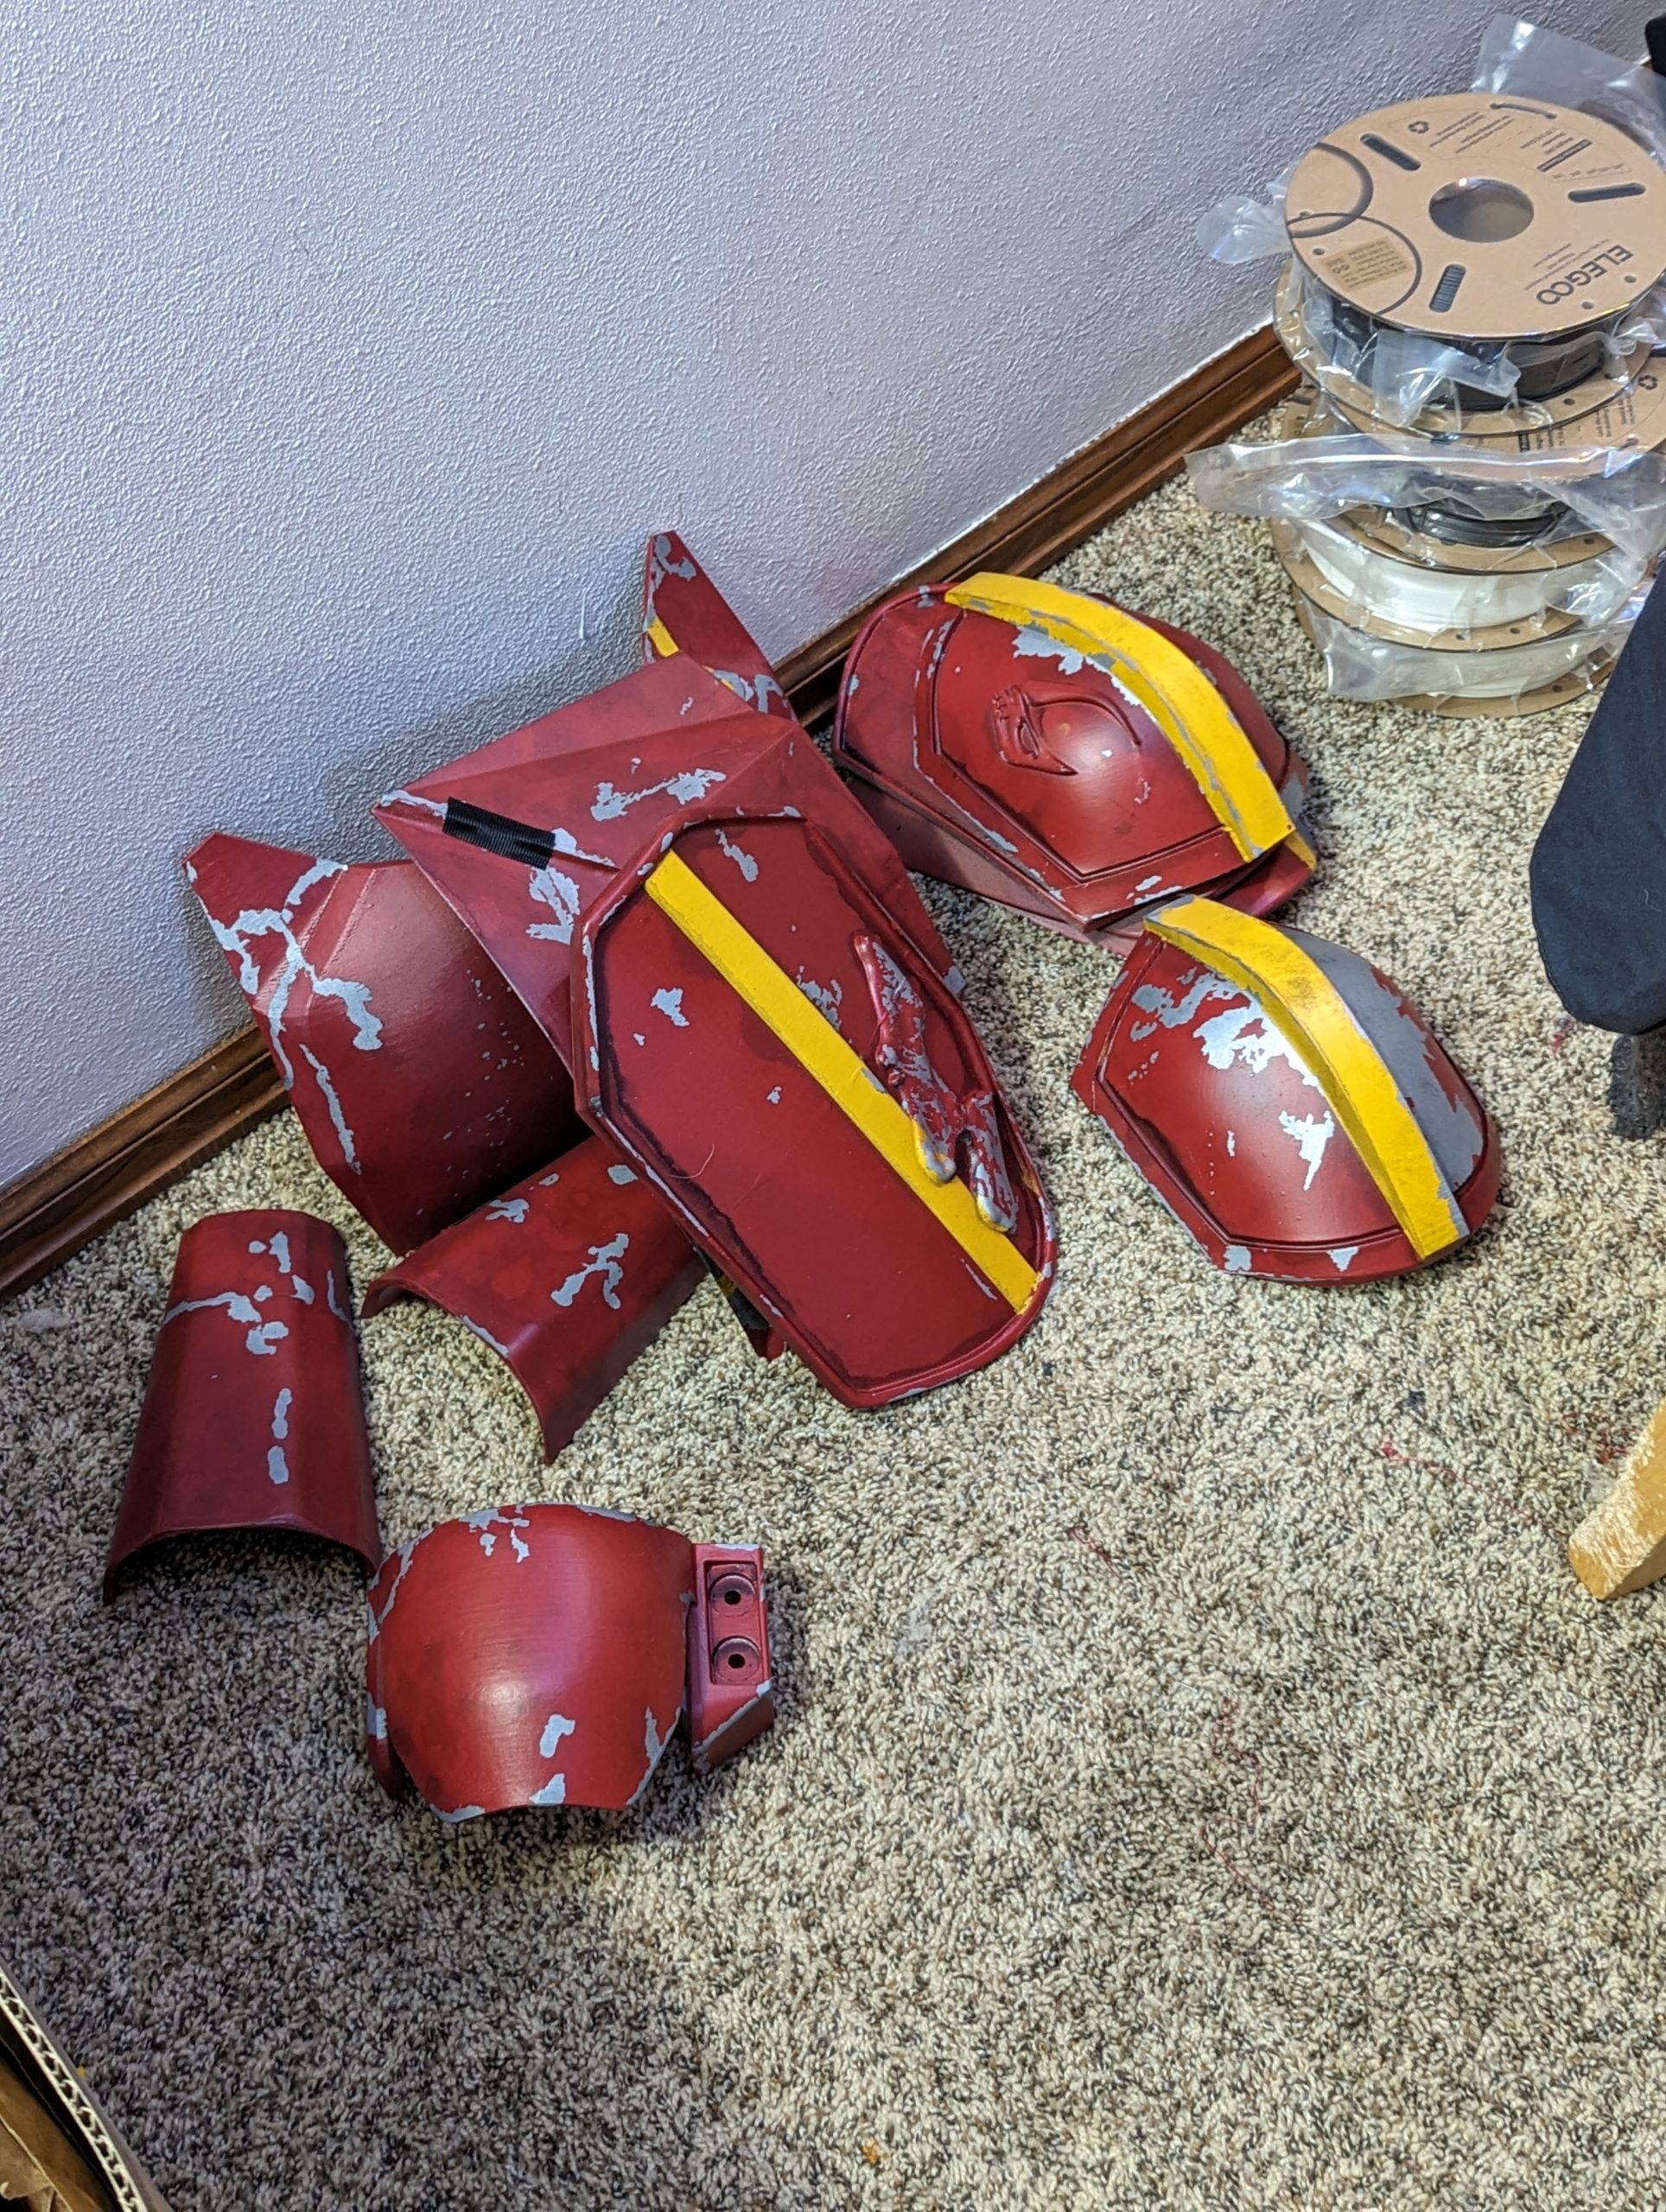 Mandalorian Armor: 3D Printing and Assembly